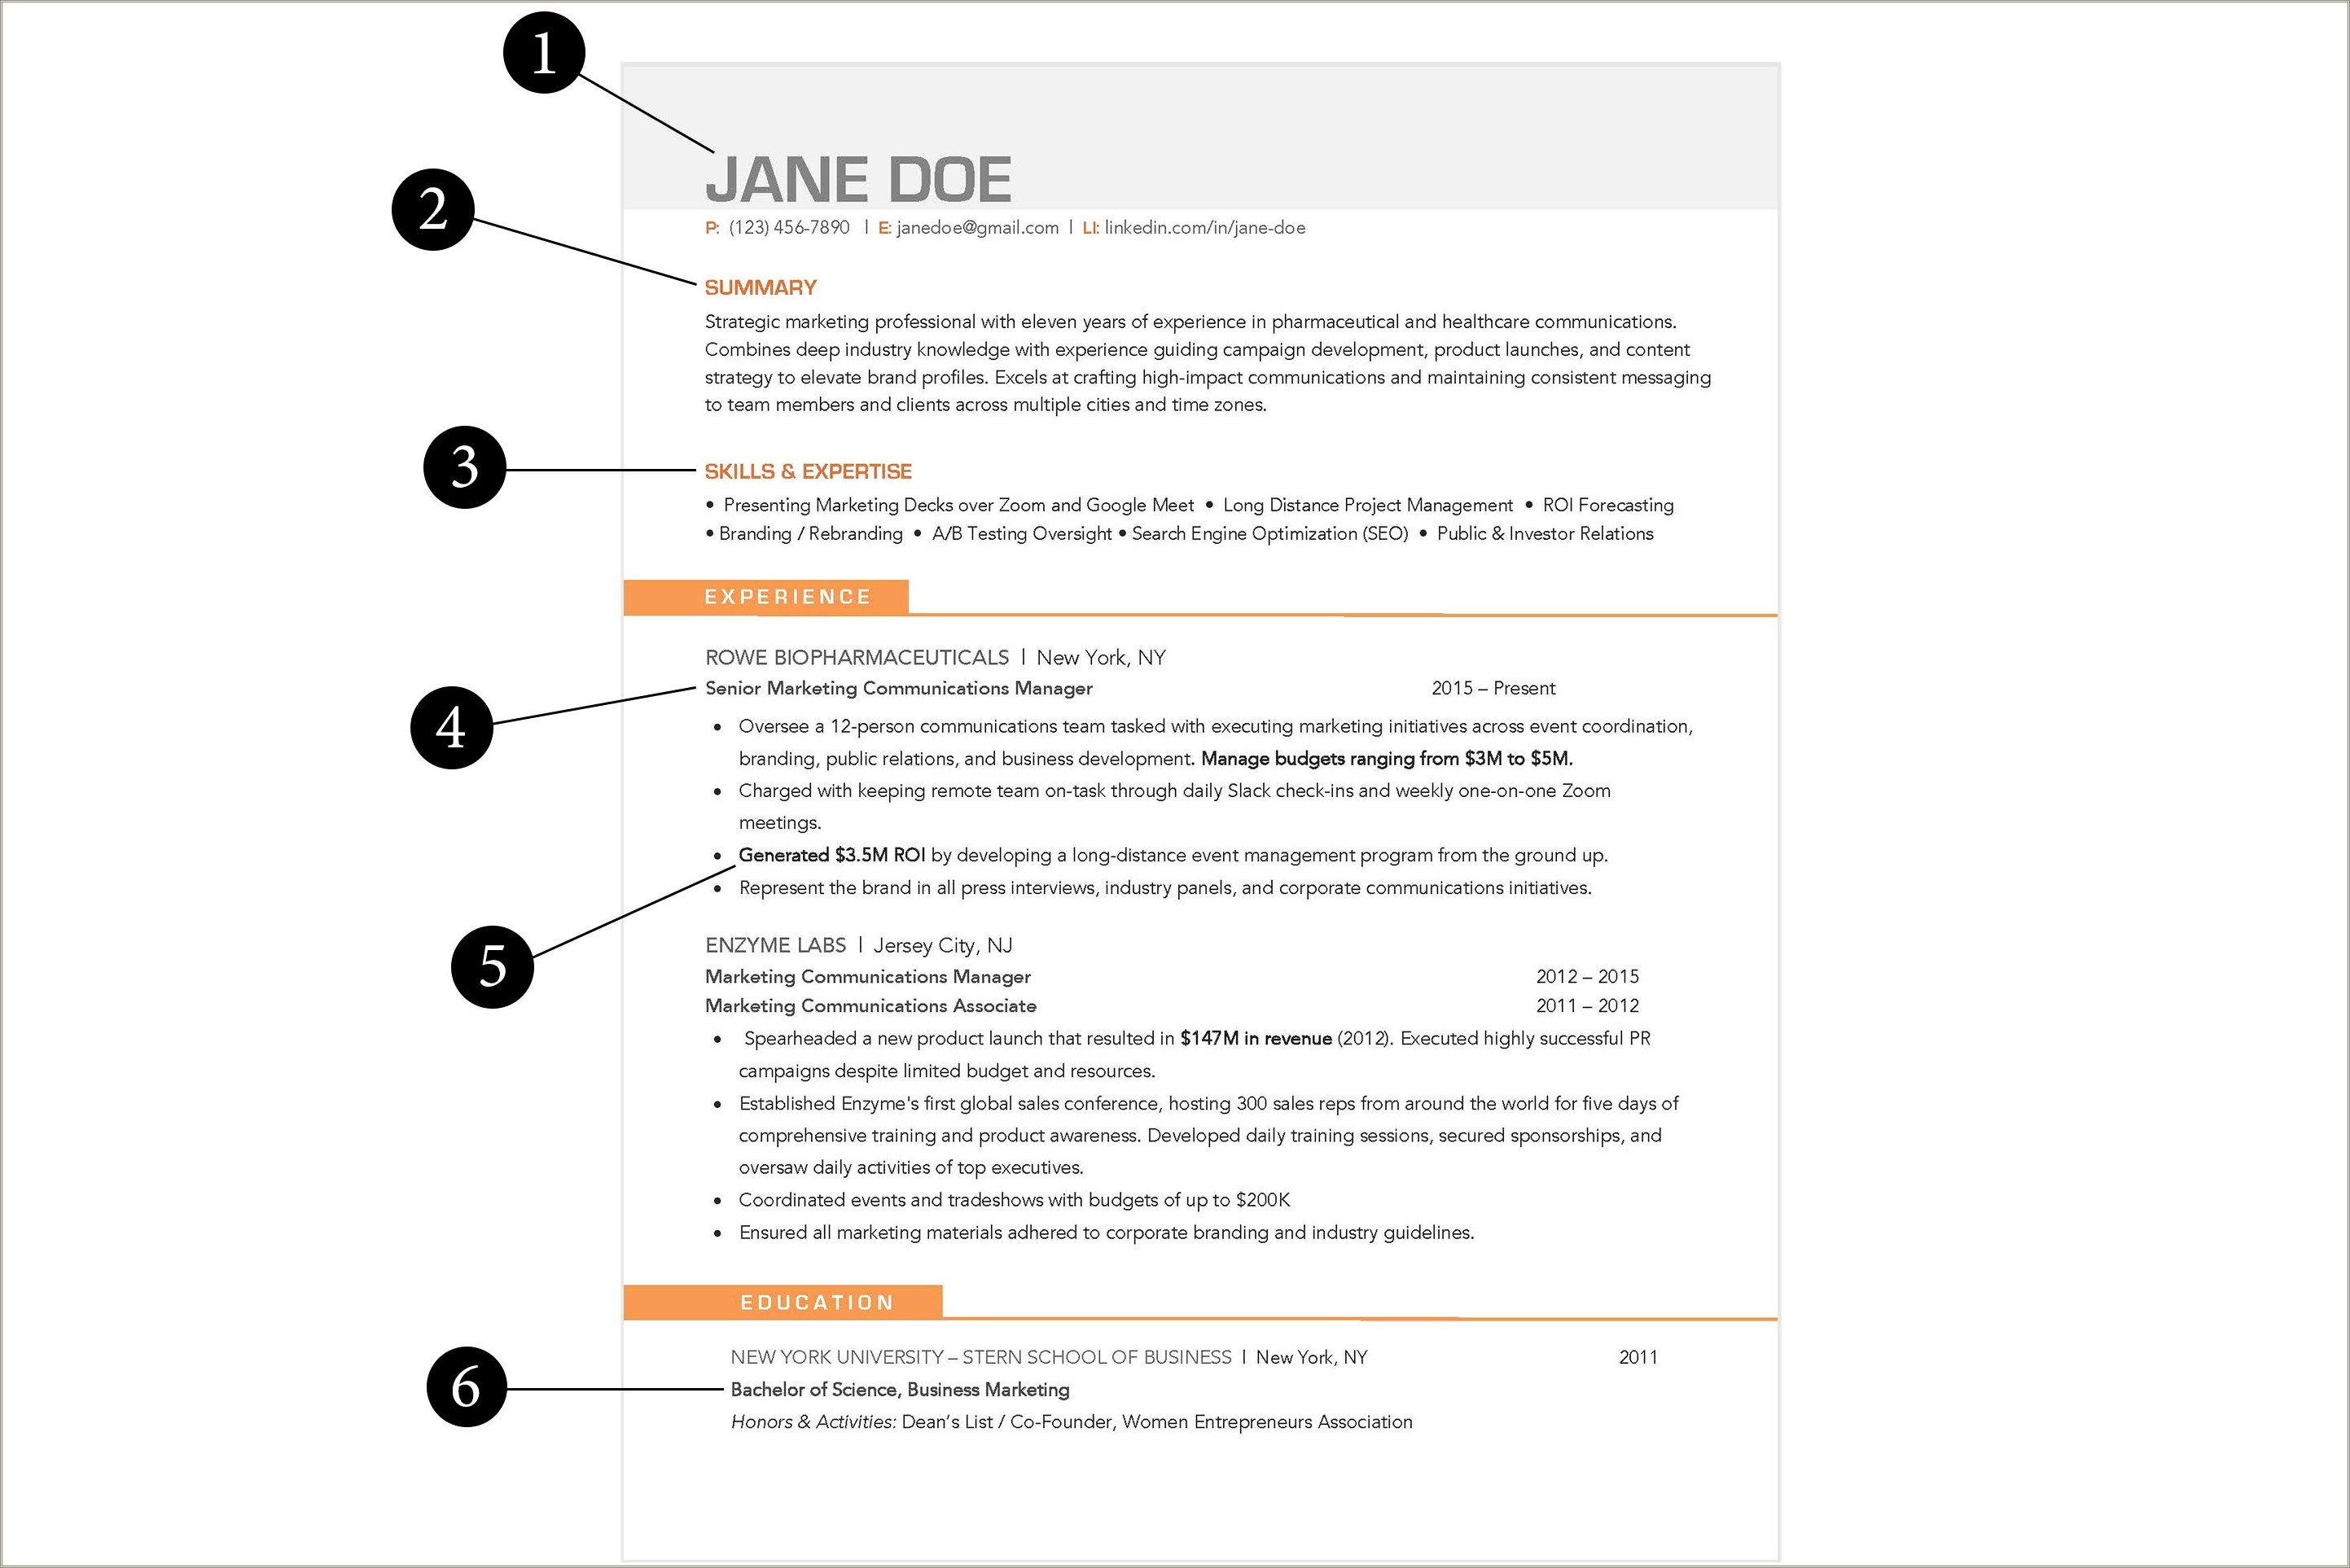 Creating A Good Resume With No Job Experience